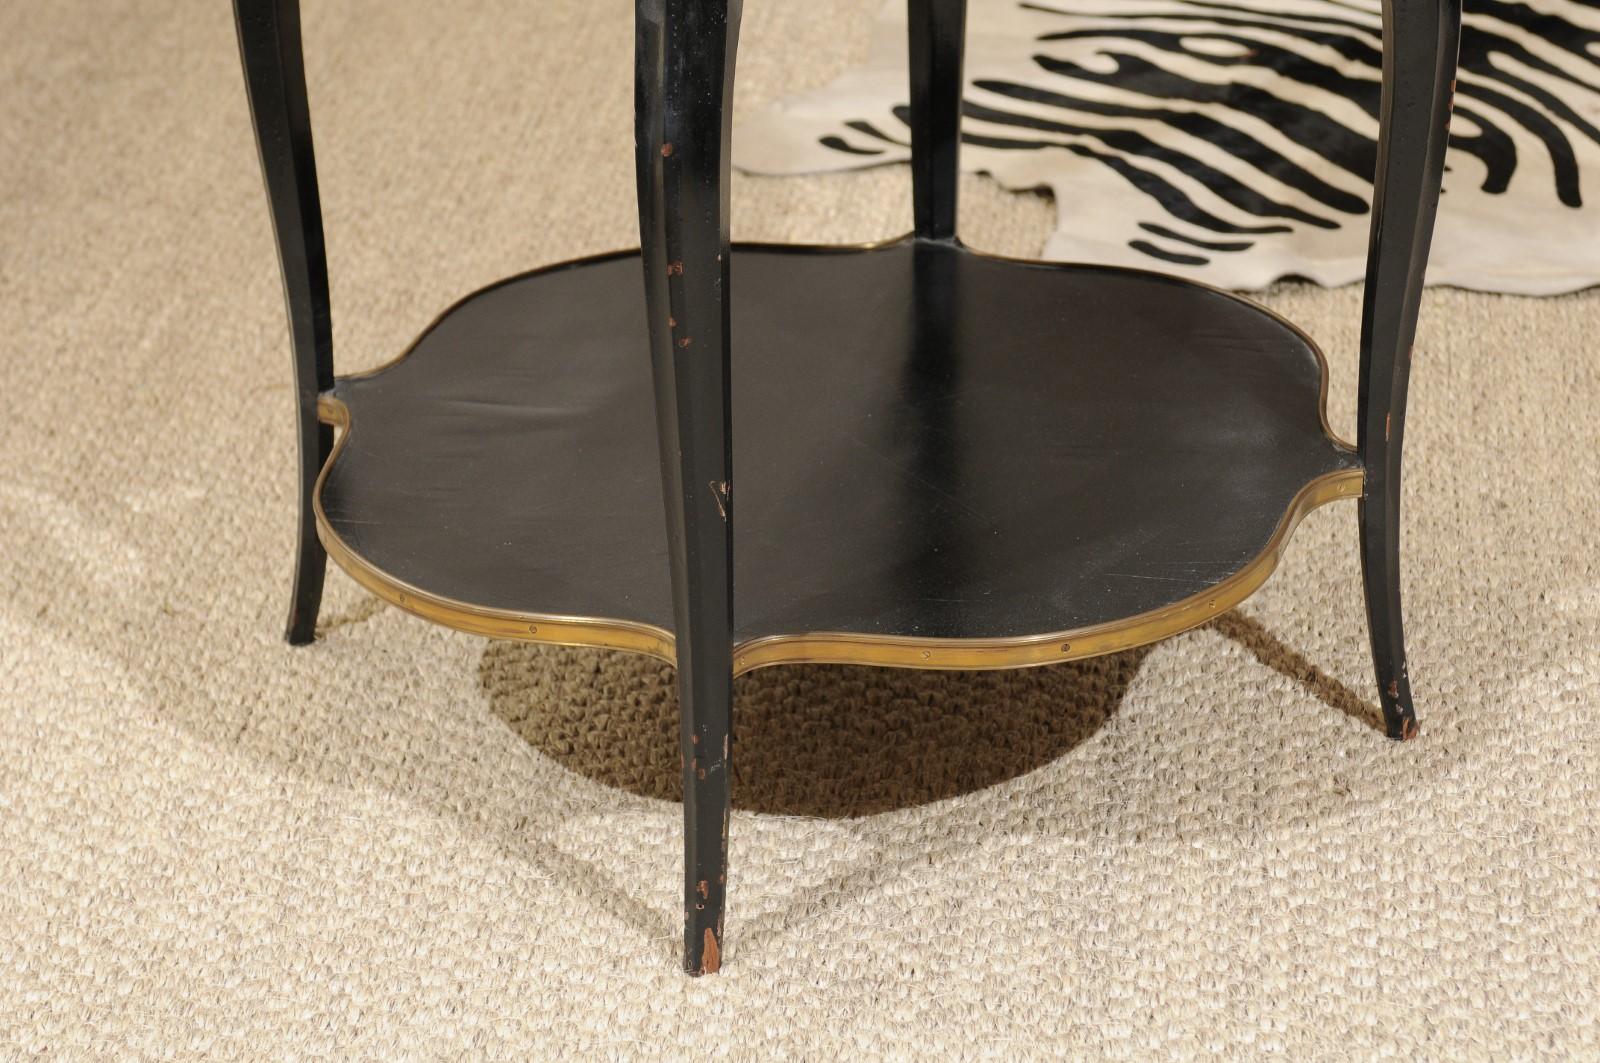 French 1920s Napoleon III Style Quatrefoil Black-Painted Accent Table with Gilt Accents